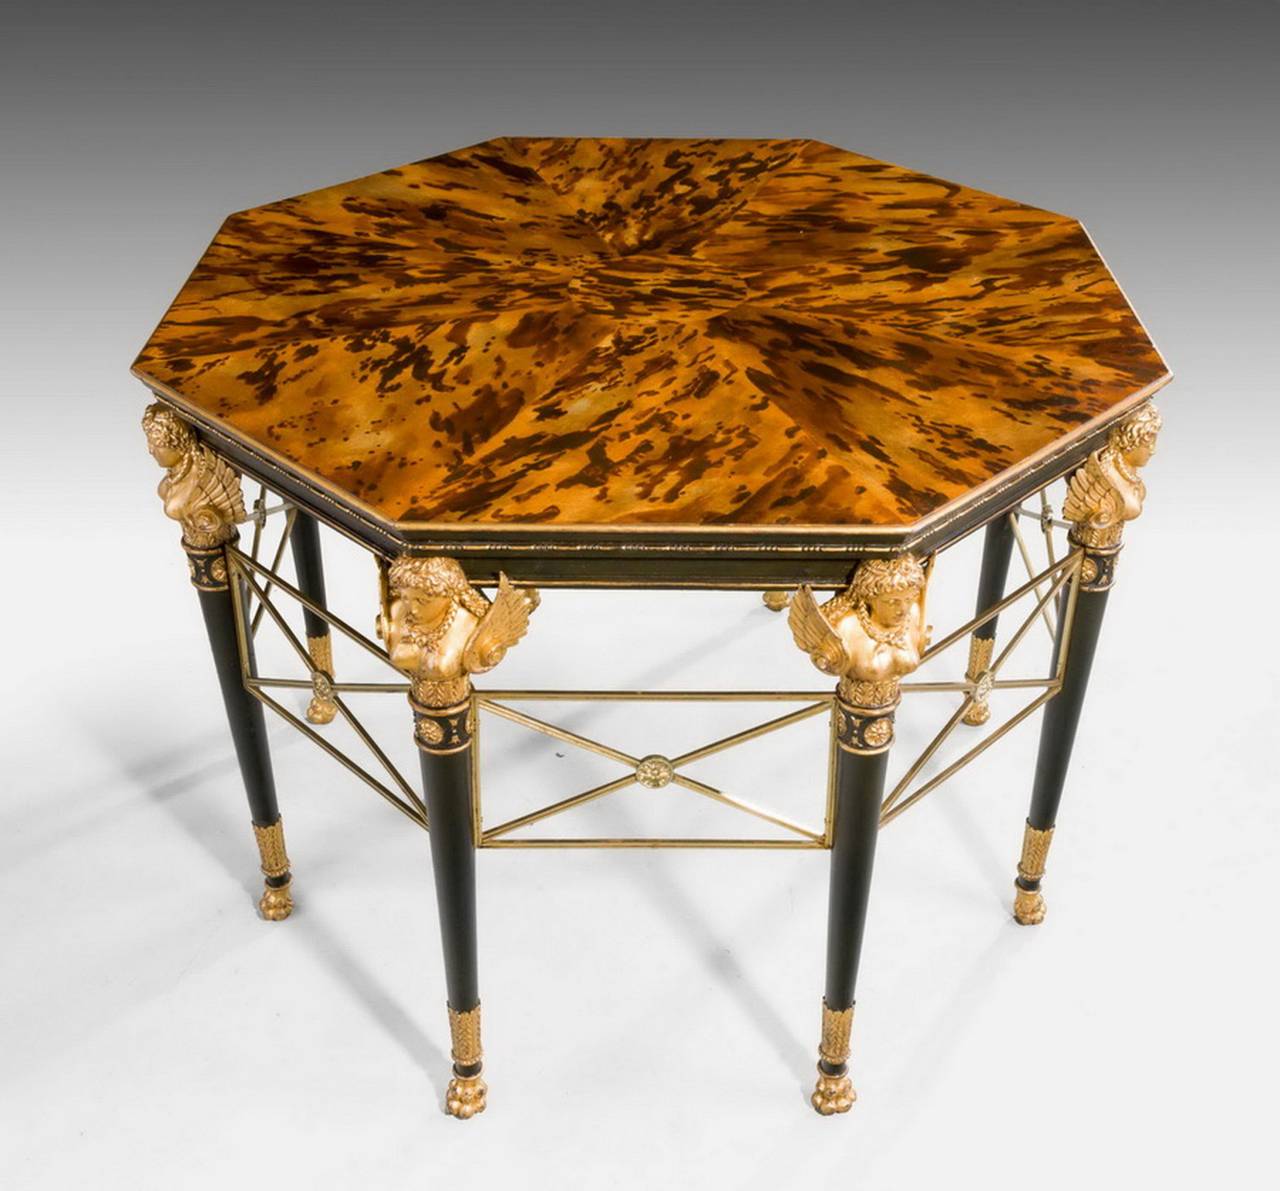 A fine and imposing 19th century giltwood faux bronze centre table, the supports with beautifully carved and winged busts, the centre section with gilt bronze mounts above faux tortoiseshell. The whole extremely elegant and formerly in the promenade